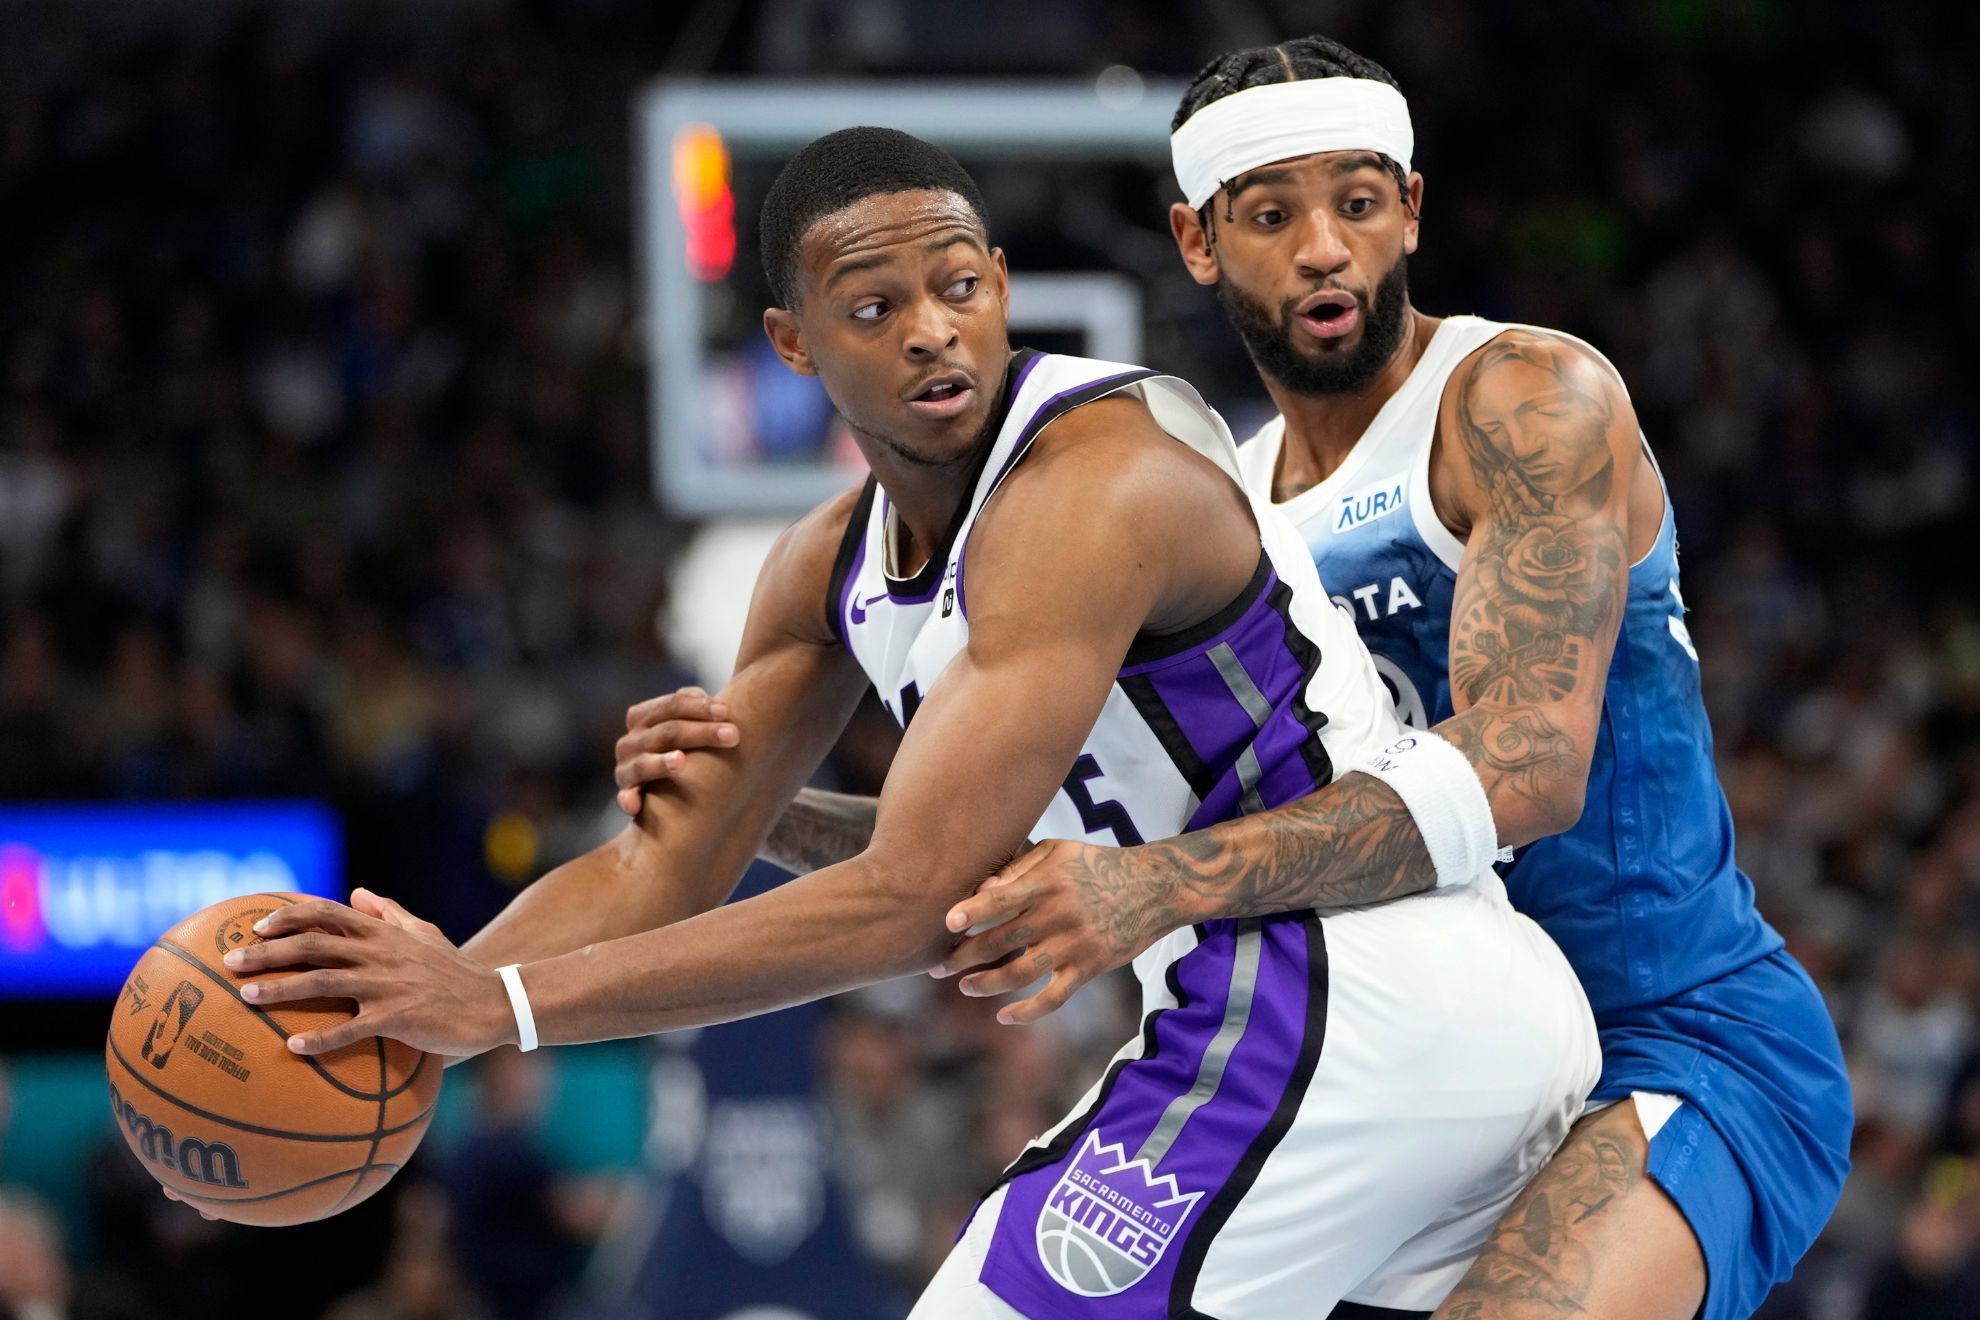 Kings stay unbeaten in NBA Cup by topping Timberwolves behind DeAaron Fox